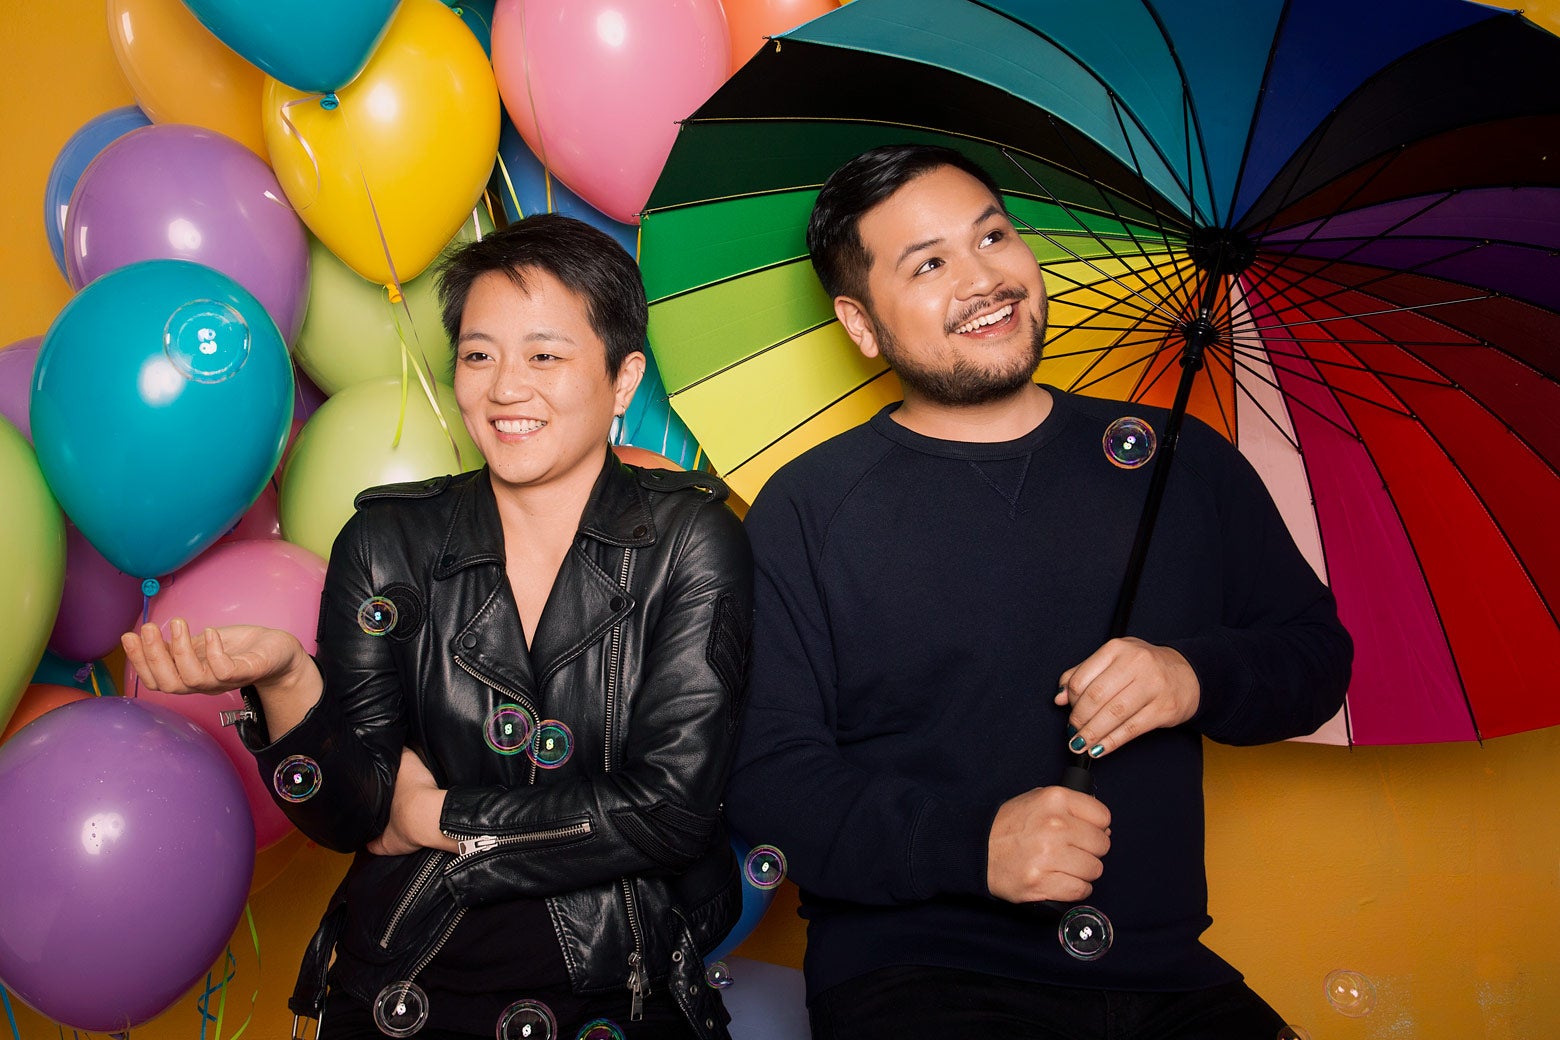 Kathy Tu and Tobin Low, with balloons of many colors in the background. Low holds a rainbow umbrella.